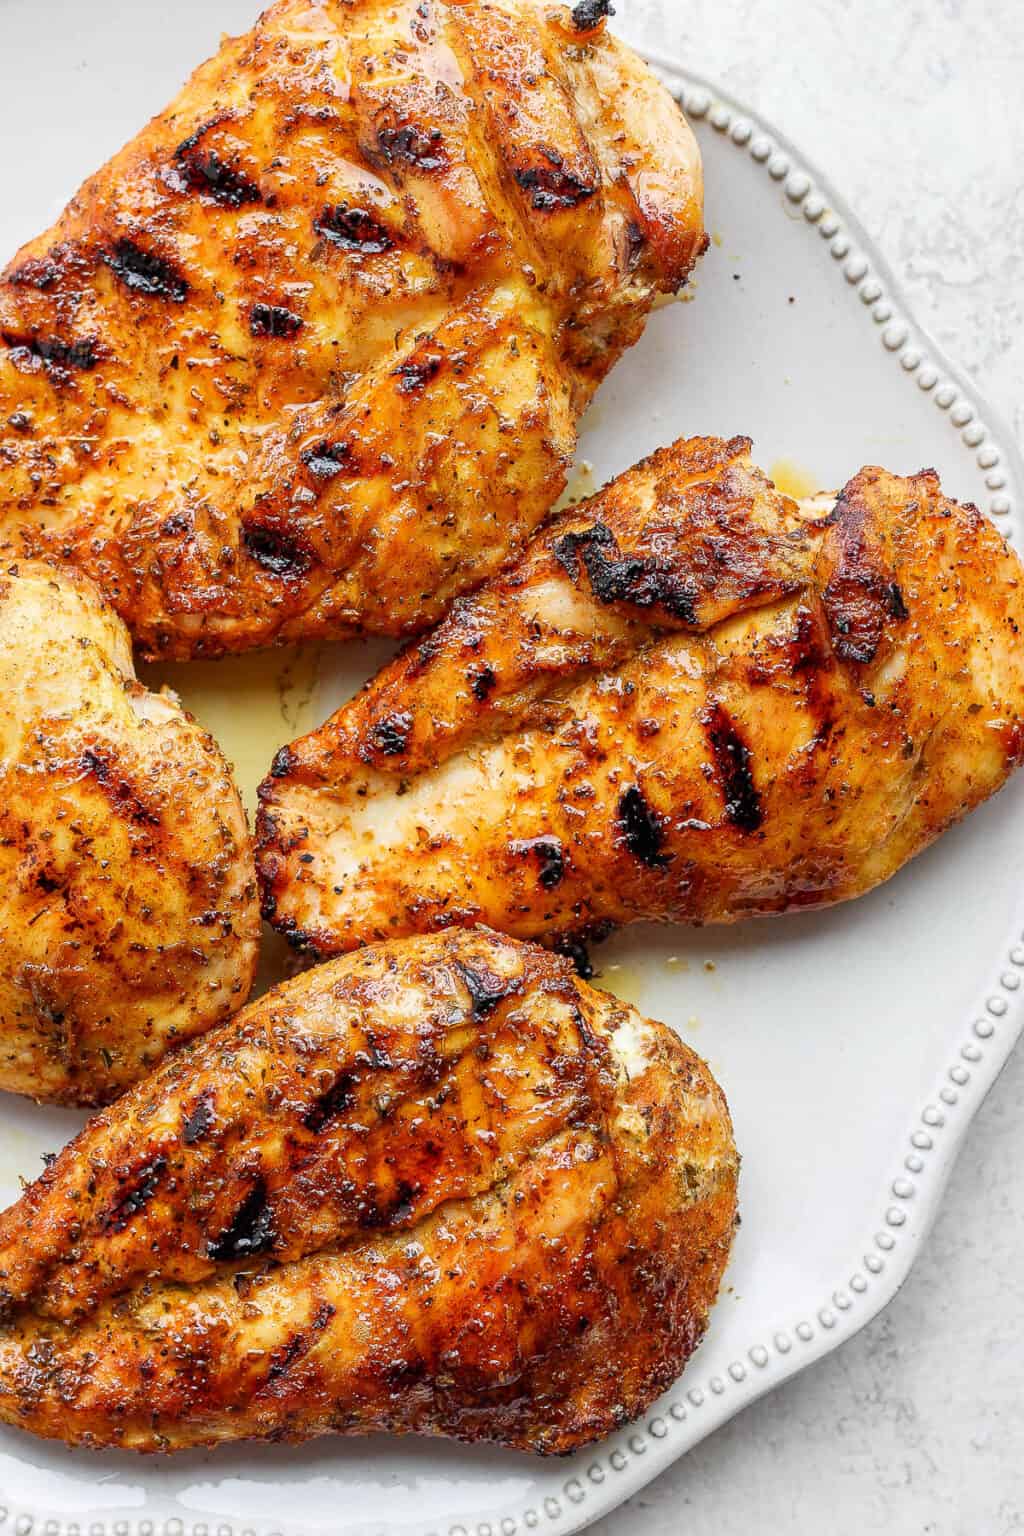 Smoked Chicken Breasts - The Wooden Skillet